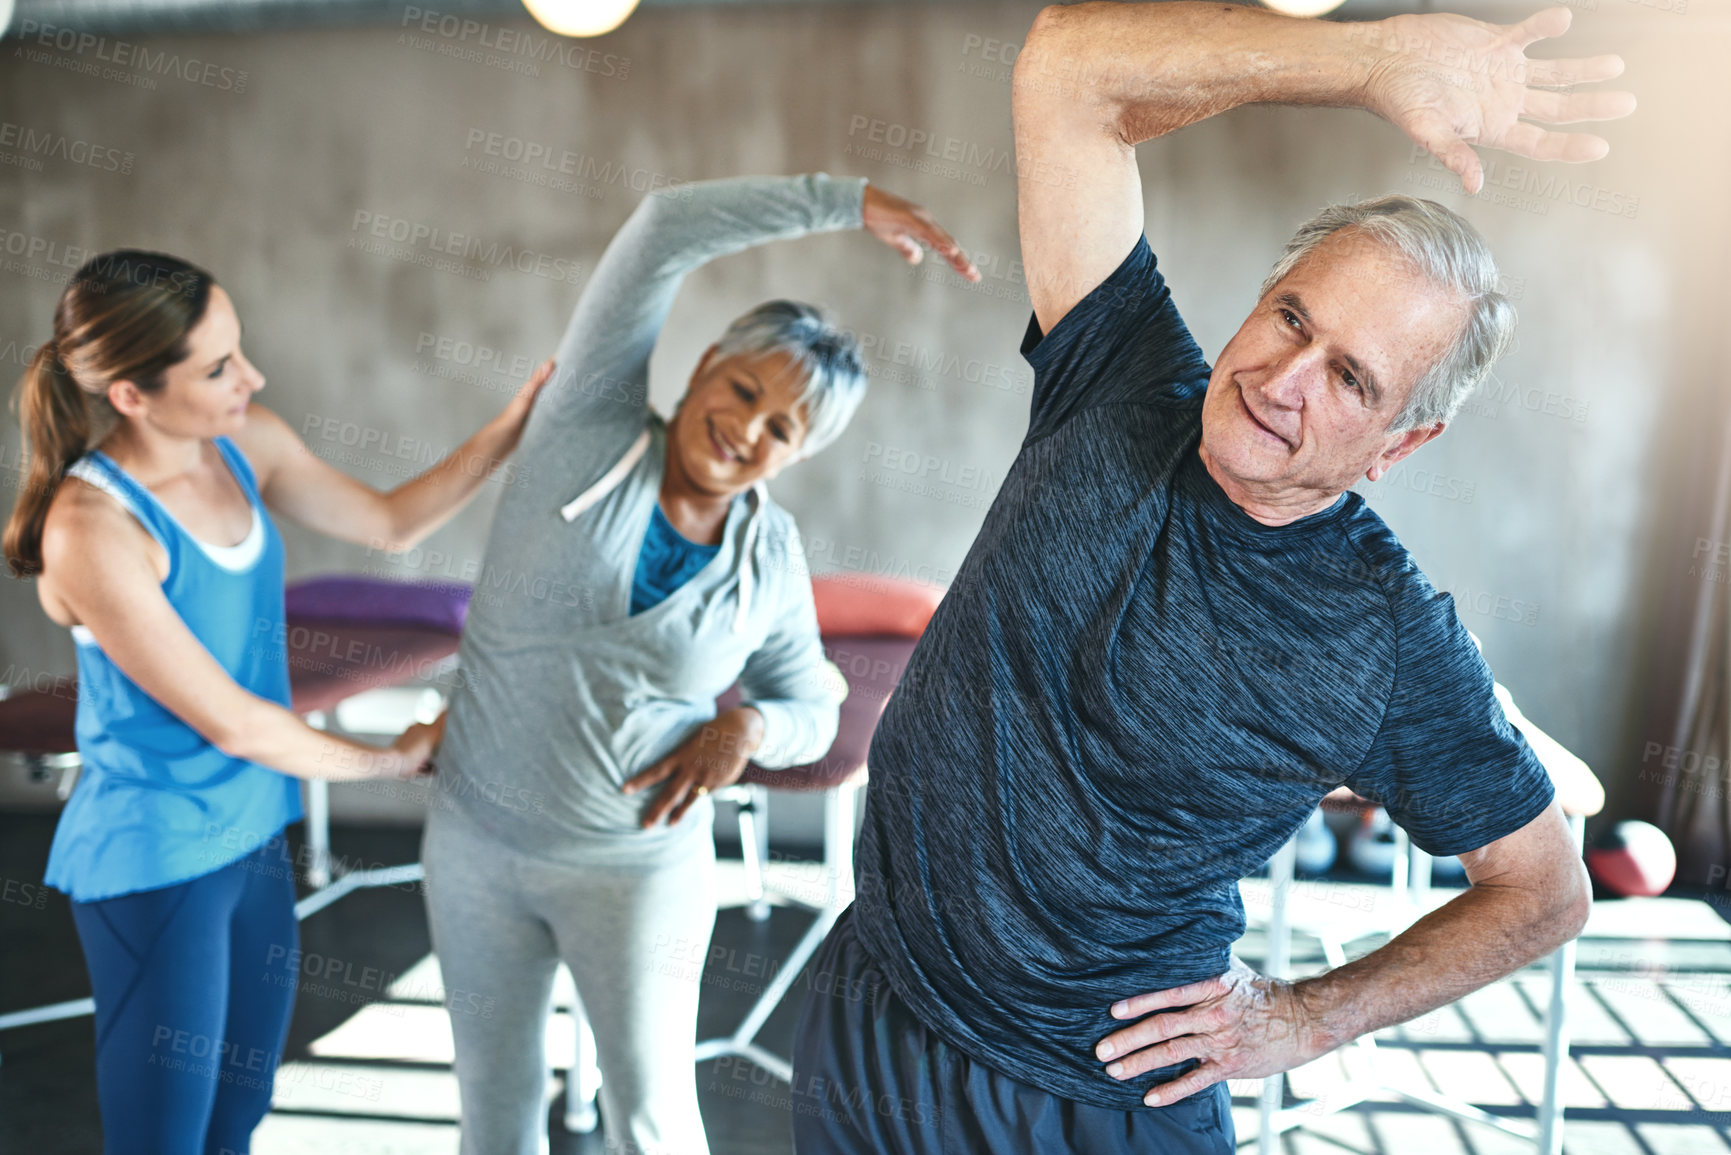 Buy stock photo Stretching, support and senior people in physical therapy for help with muscle fitness and wellness by physiotherapist. Exercise, workout and recovery in hip and spine of mature clients in class